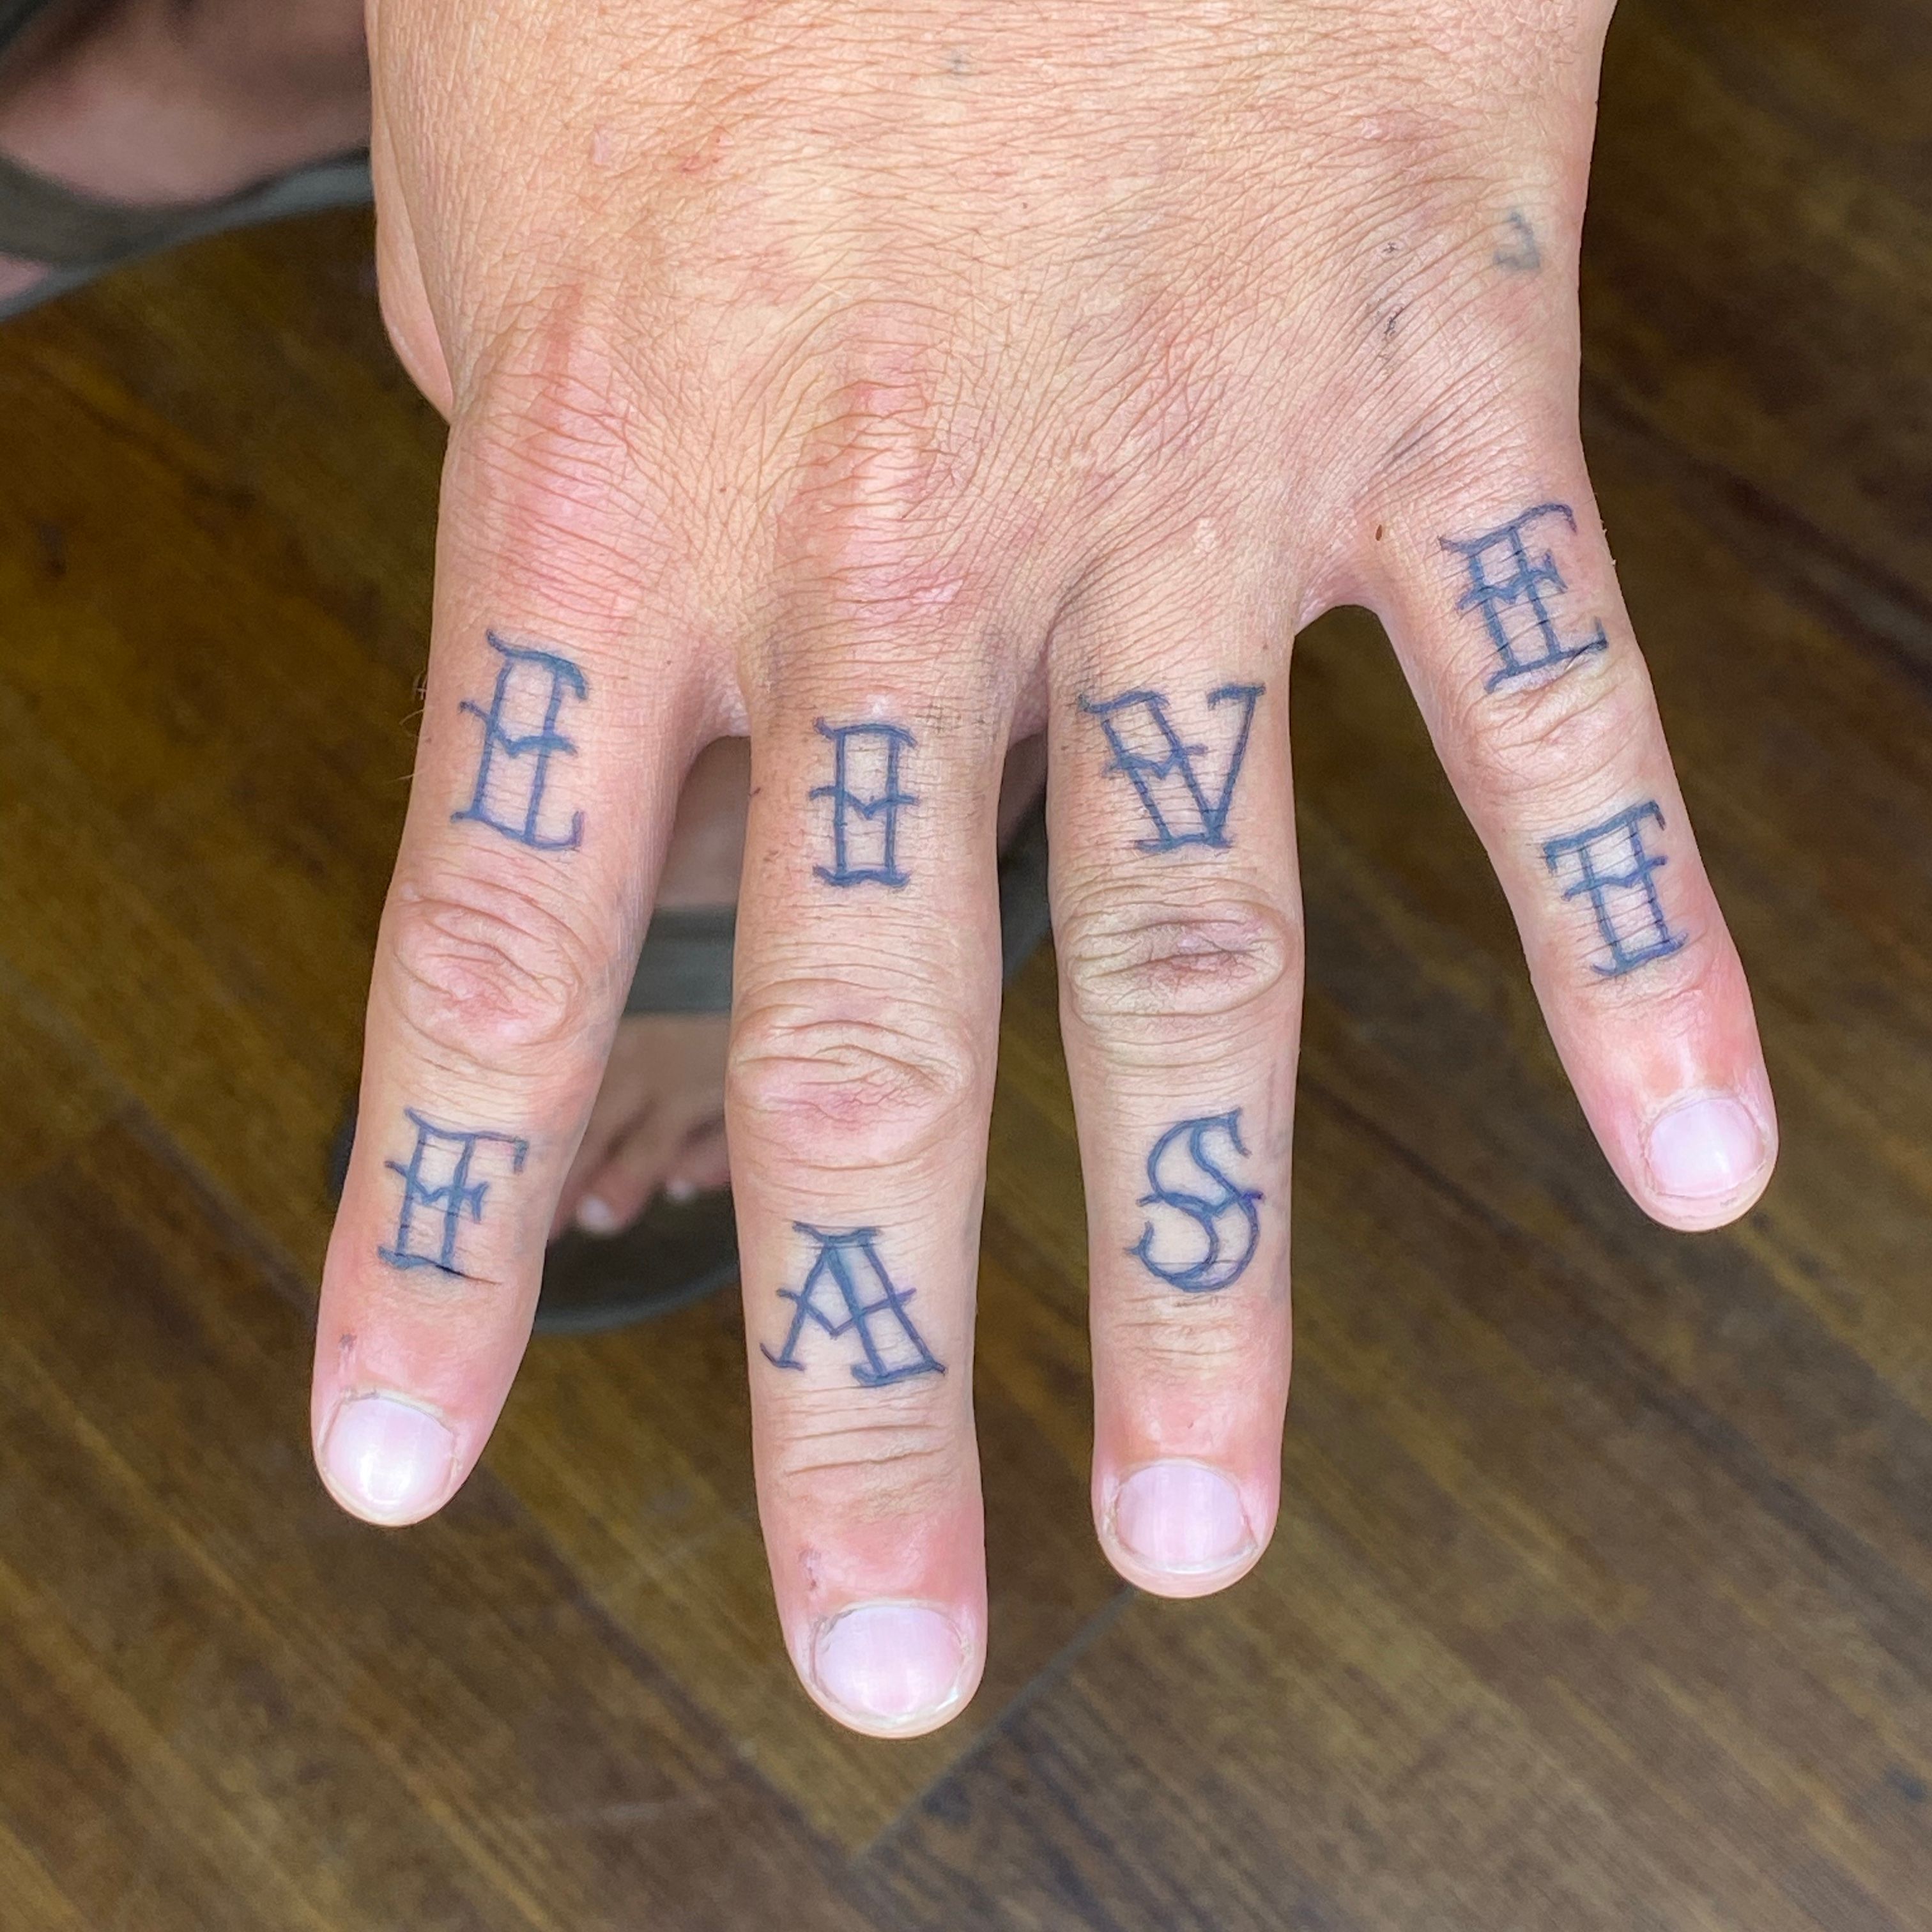 Ink fans show off their amusing knuckle tattoos | Daily Mail Online